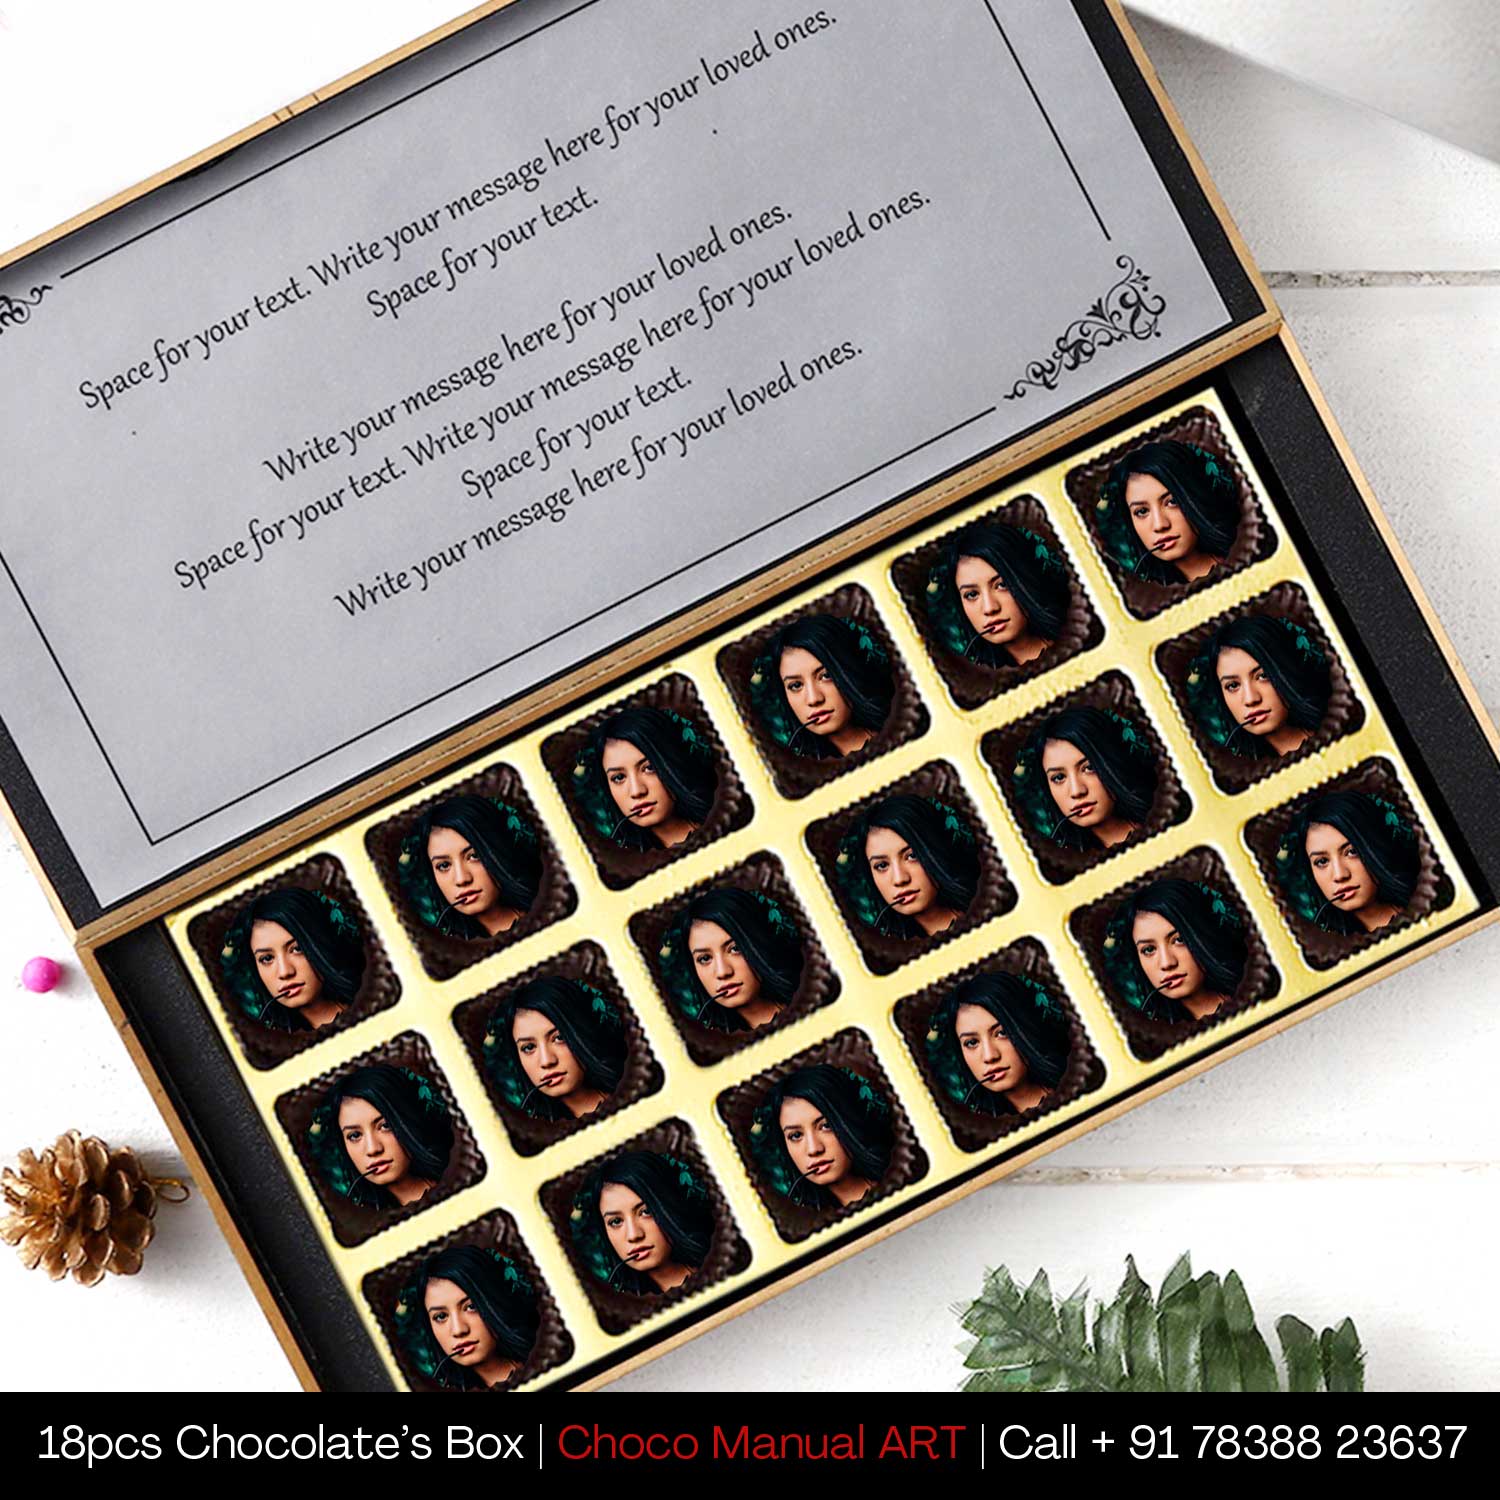  chocolate with photo printed on it personalised chocolates with names photo on chocolate wrappers personalised chocolates for birthdays personalized chocolate gifts customised chocolates near me customized chocolate box photo chocolate box